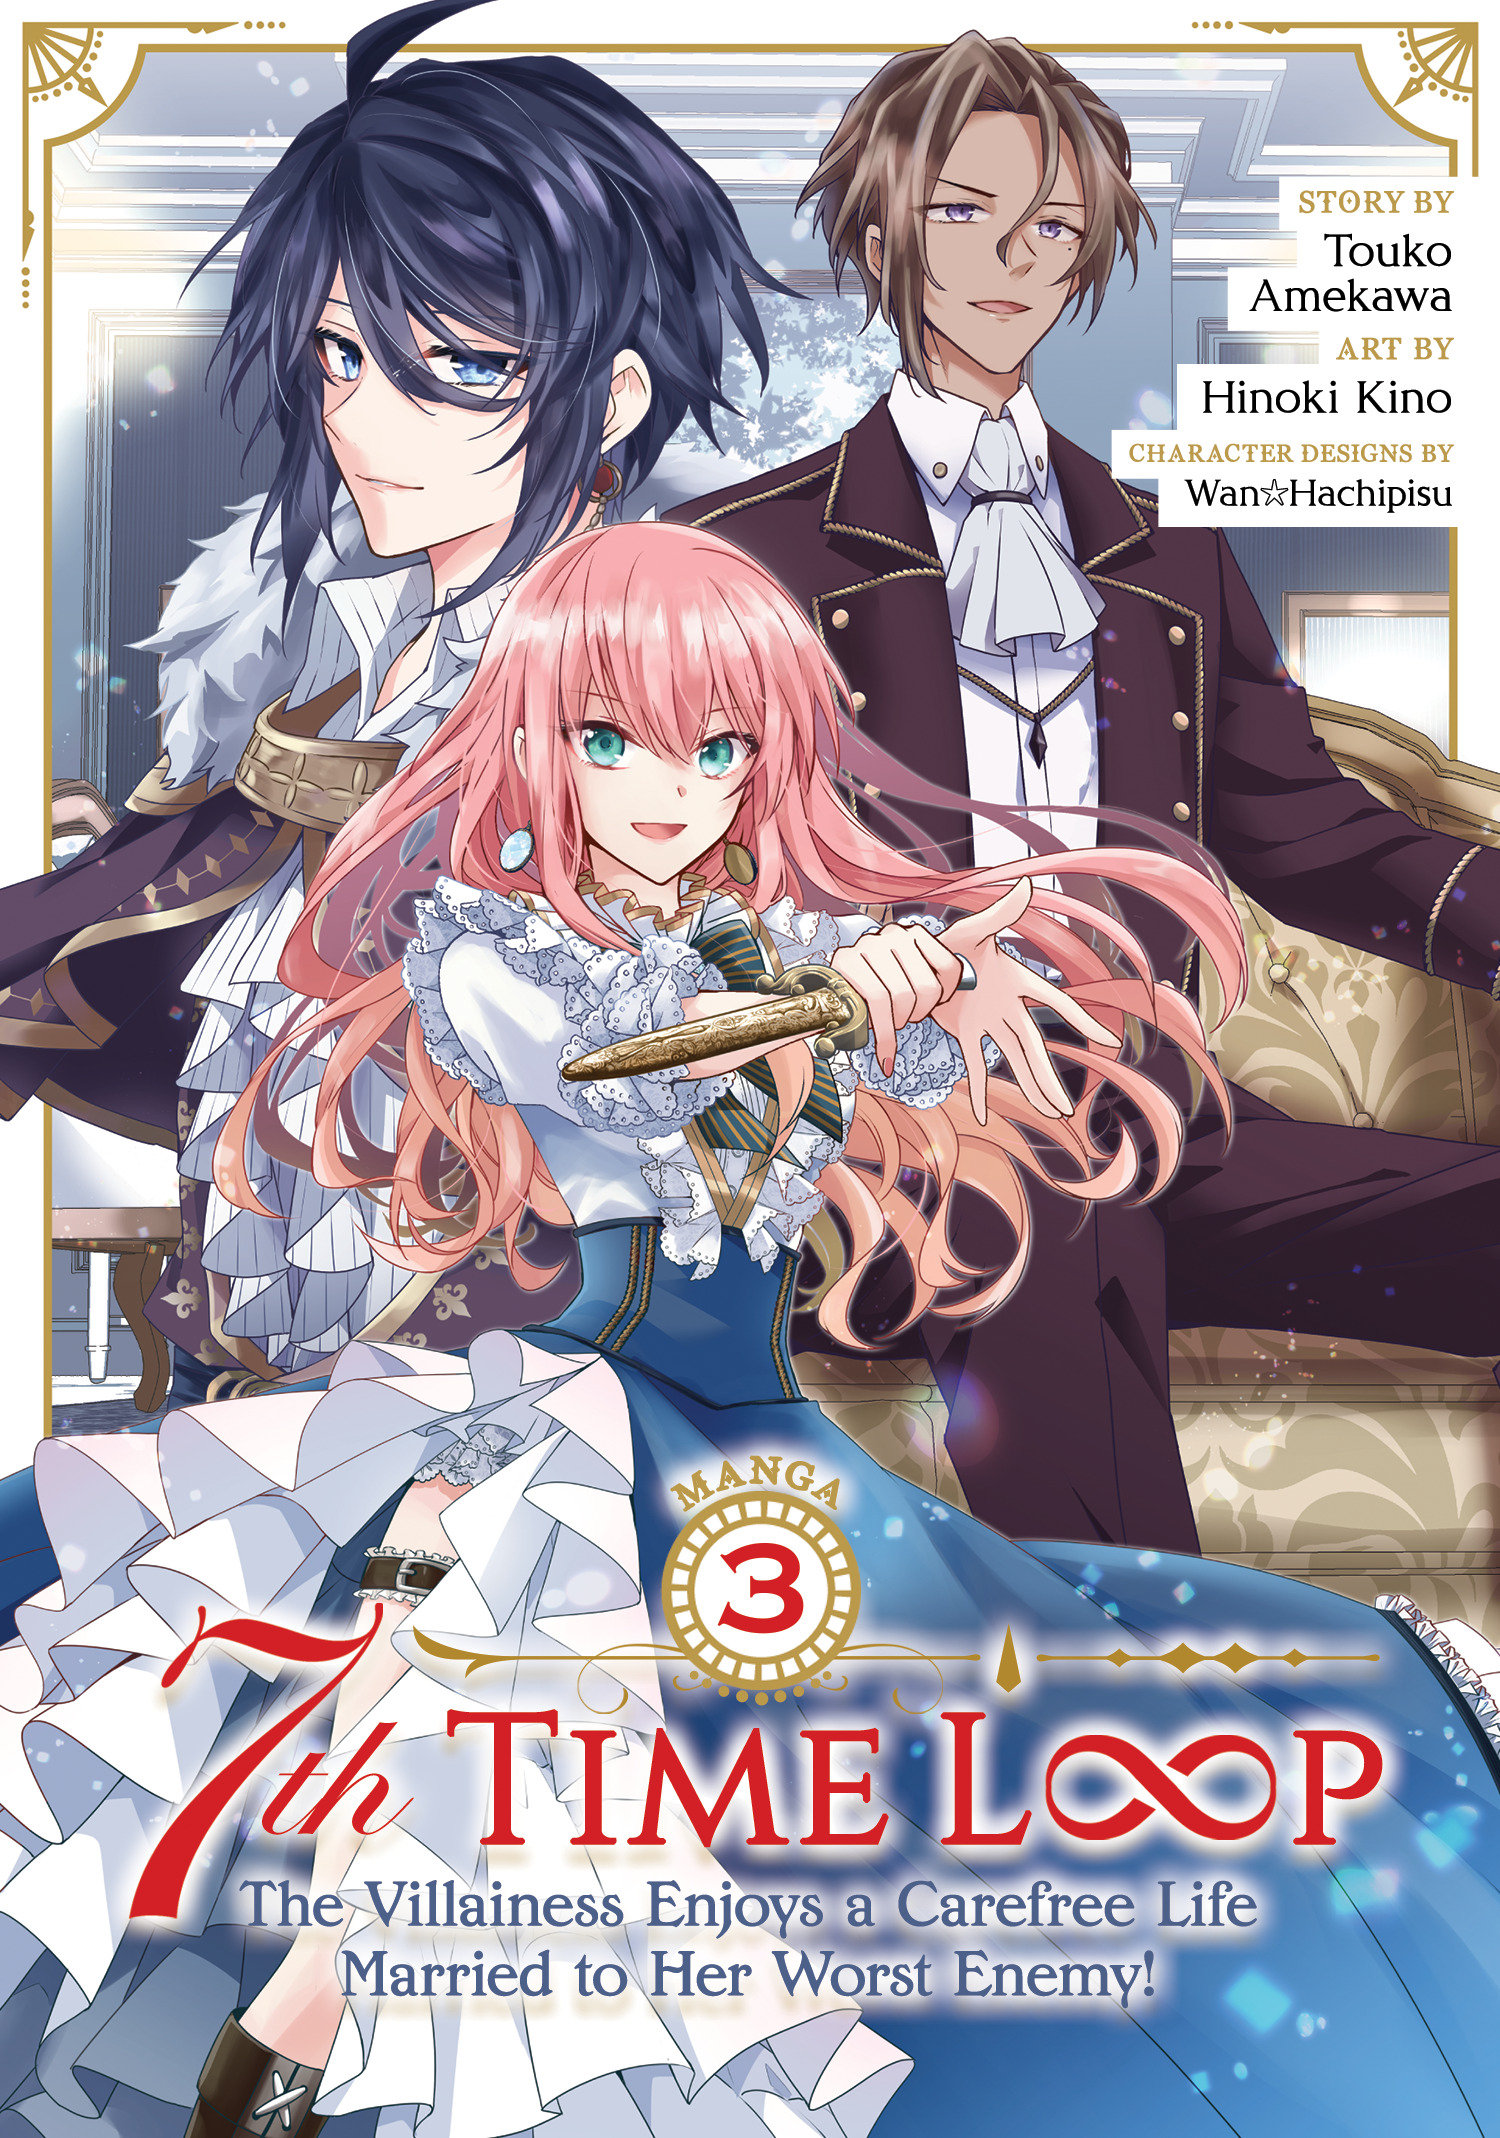 7th Time Loop the Villainess Enjoys a Carefree Life Married to Her Worst Enemy! Manga Volume 3